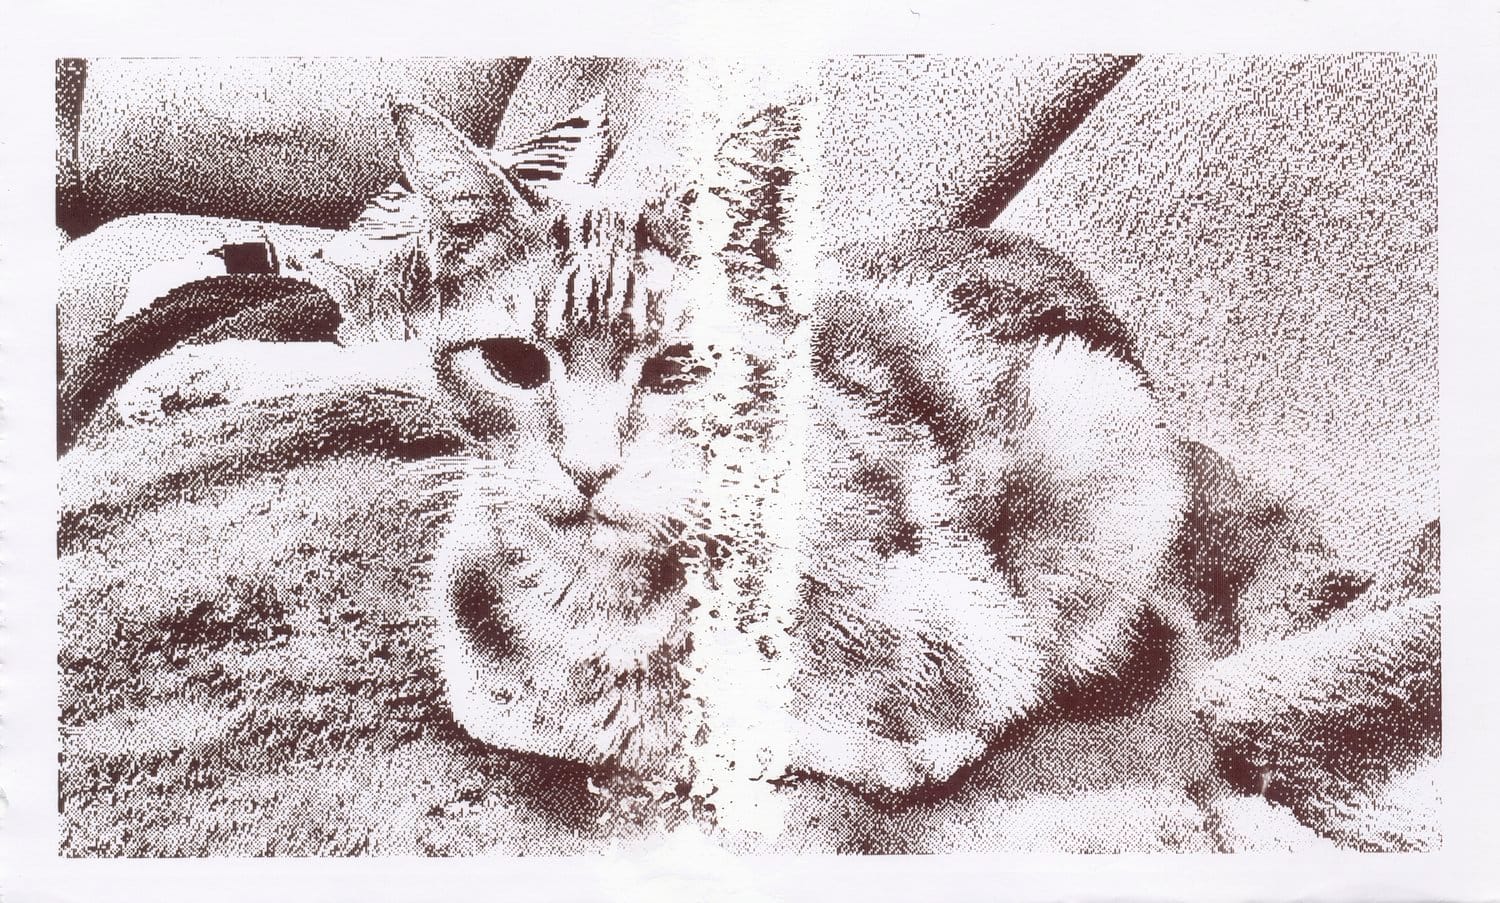 Grayscale thermal print of a cat sitting on a blanket on a couch with a visible printing error down the middle of the image, somewhat obscuring the cat's face